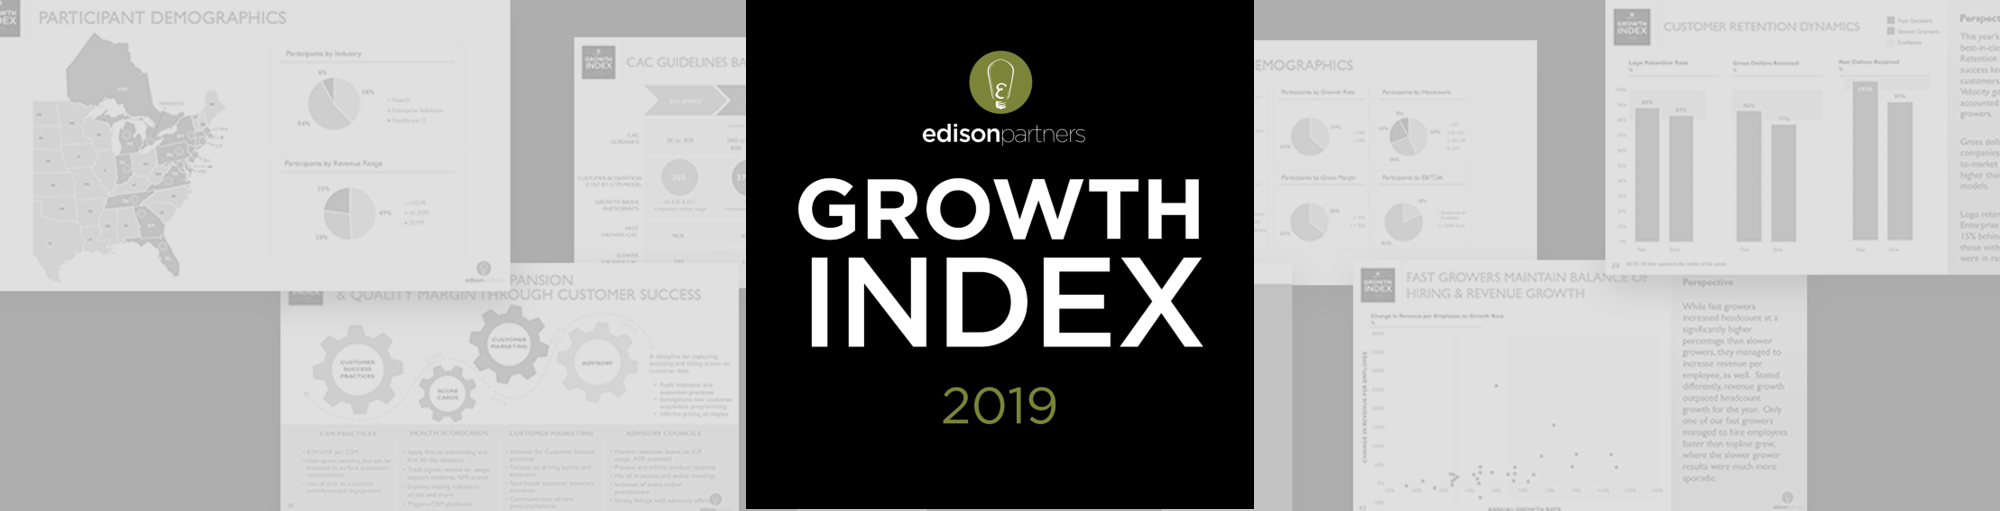 Edison Partners Growth Index Reveals 7 Traits of Fast-Growth Tech Companies